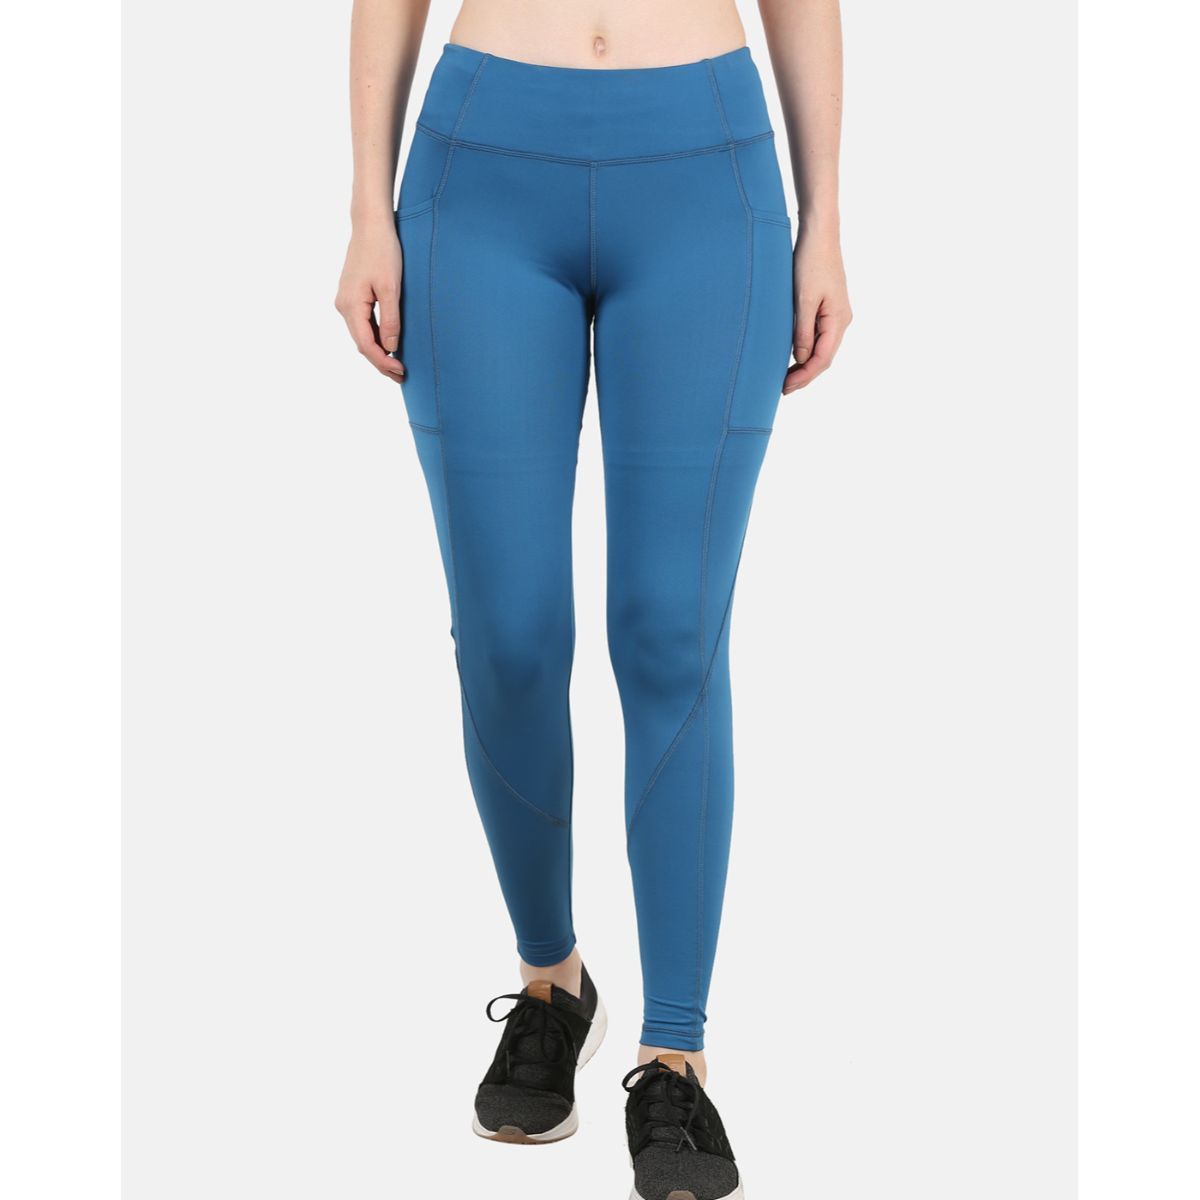 Sweaty Betty Power 7/8 Workout Leggings | Red's Threads - Red's Threads